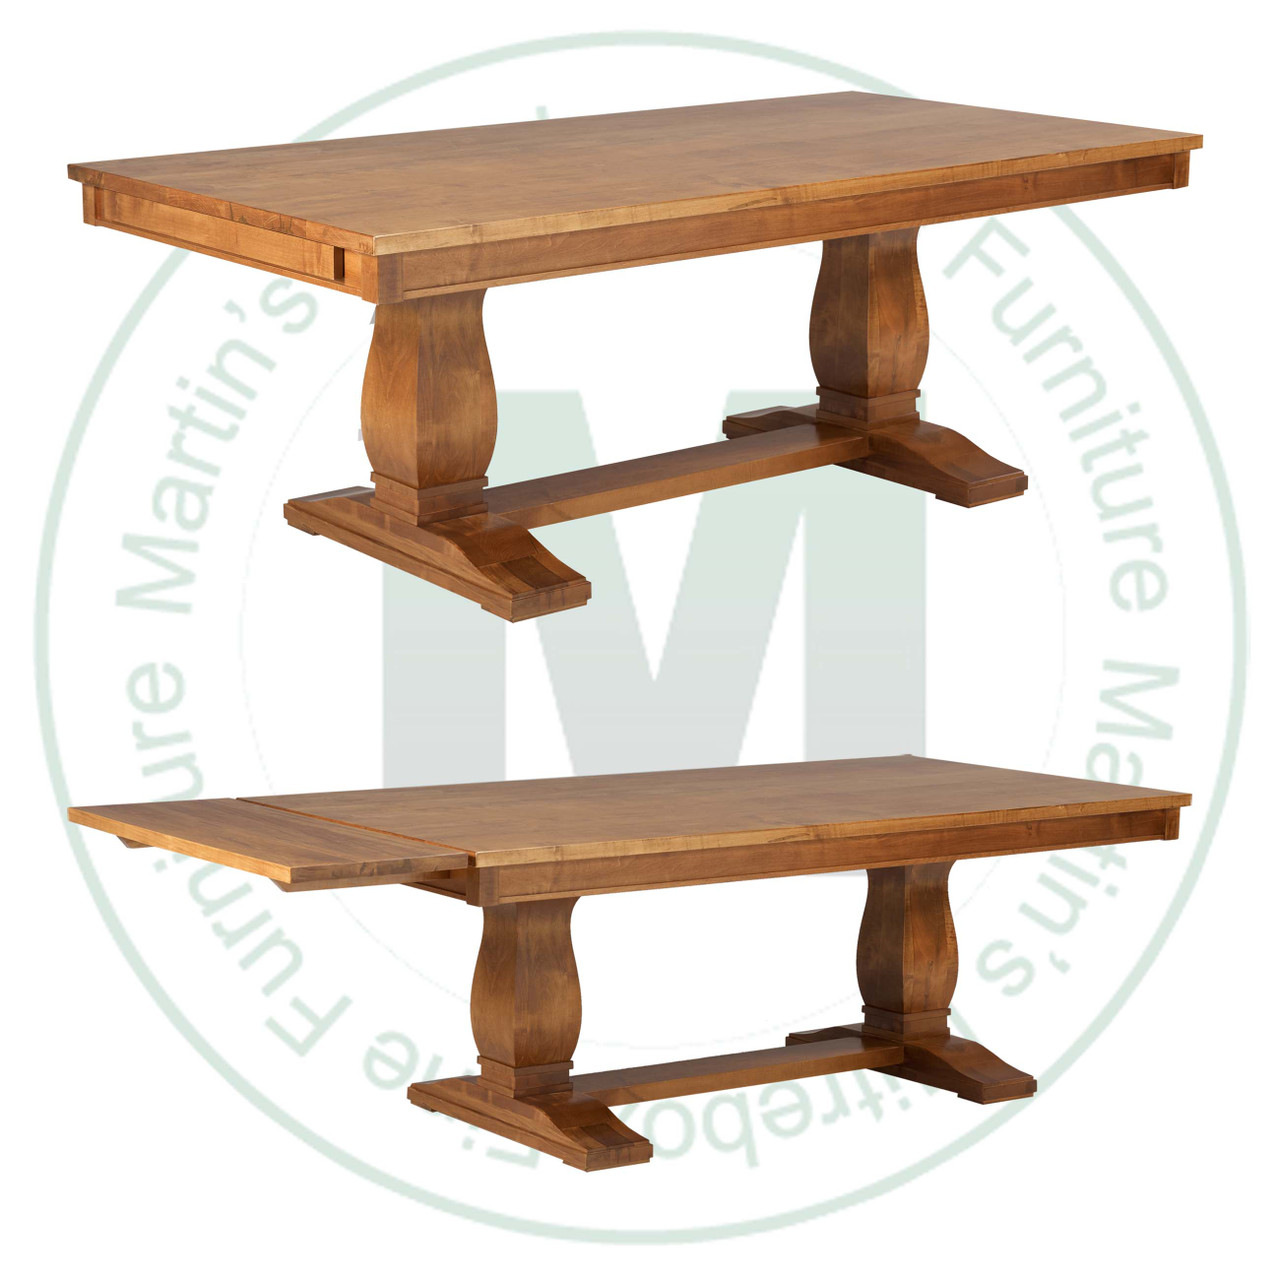 Maple Madrid Solid Top Double Pedestal Table 48''D x 120''W x 30''H With 2 - 16'' Leaves On End Table Has 1.25'' Thick Top